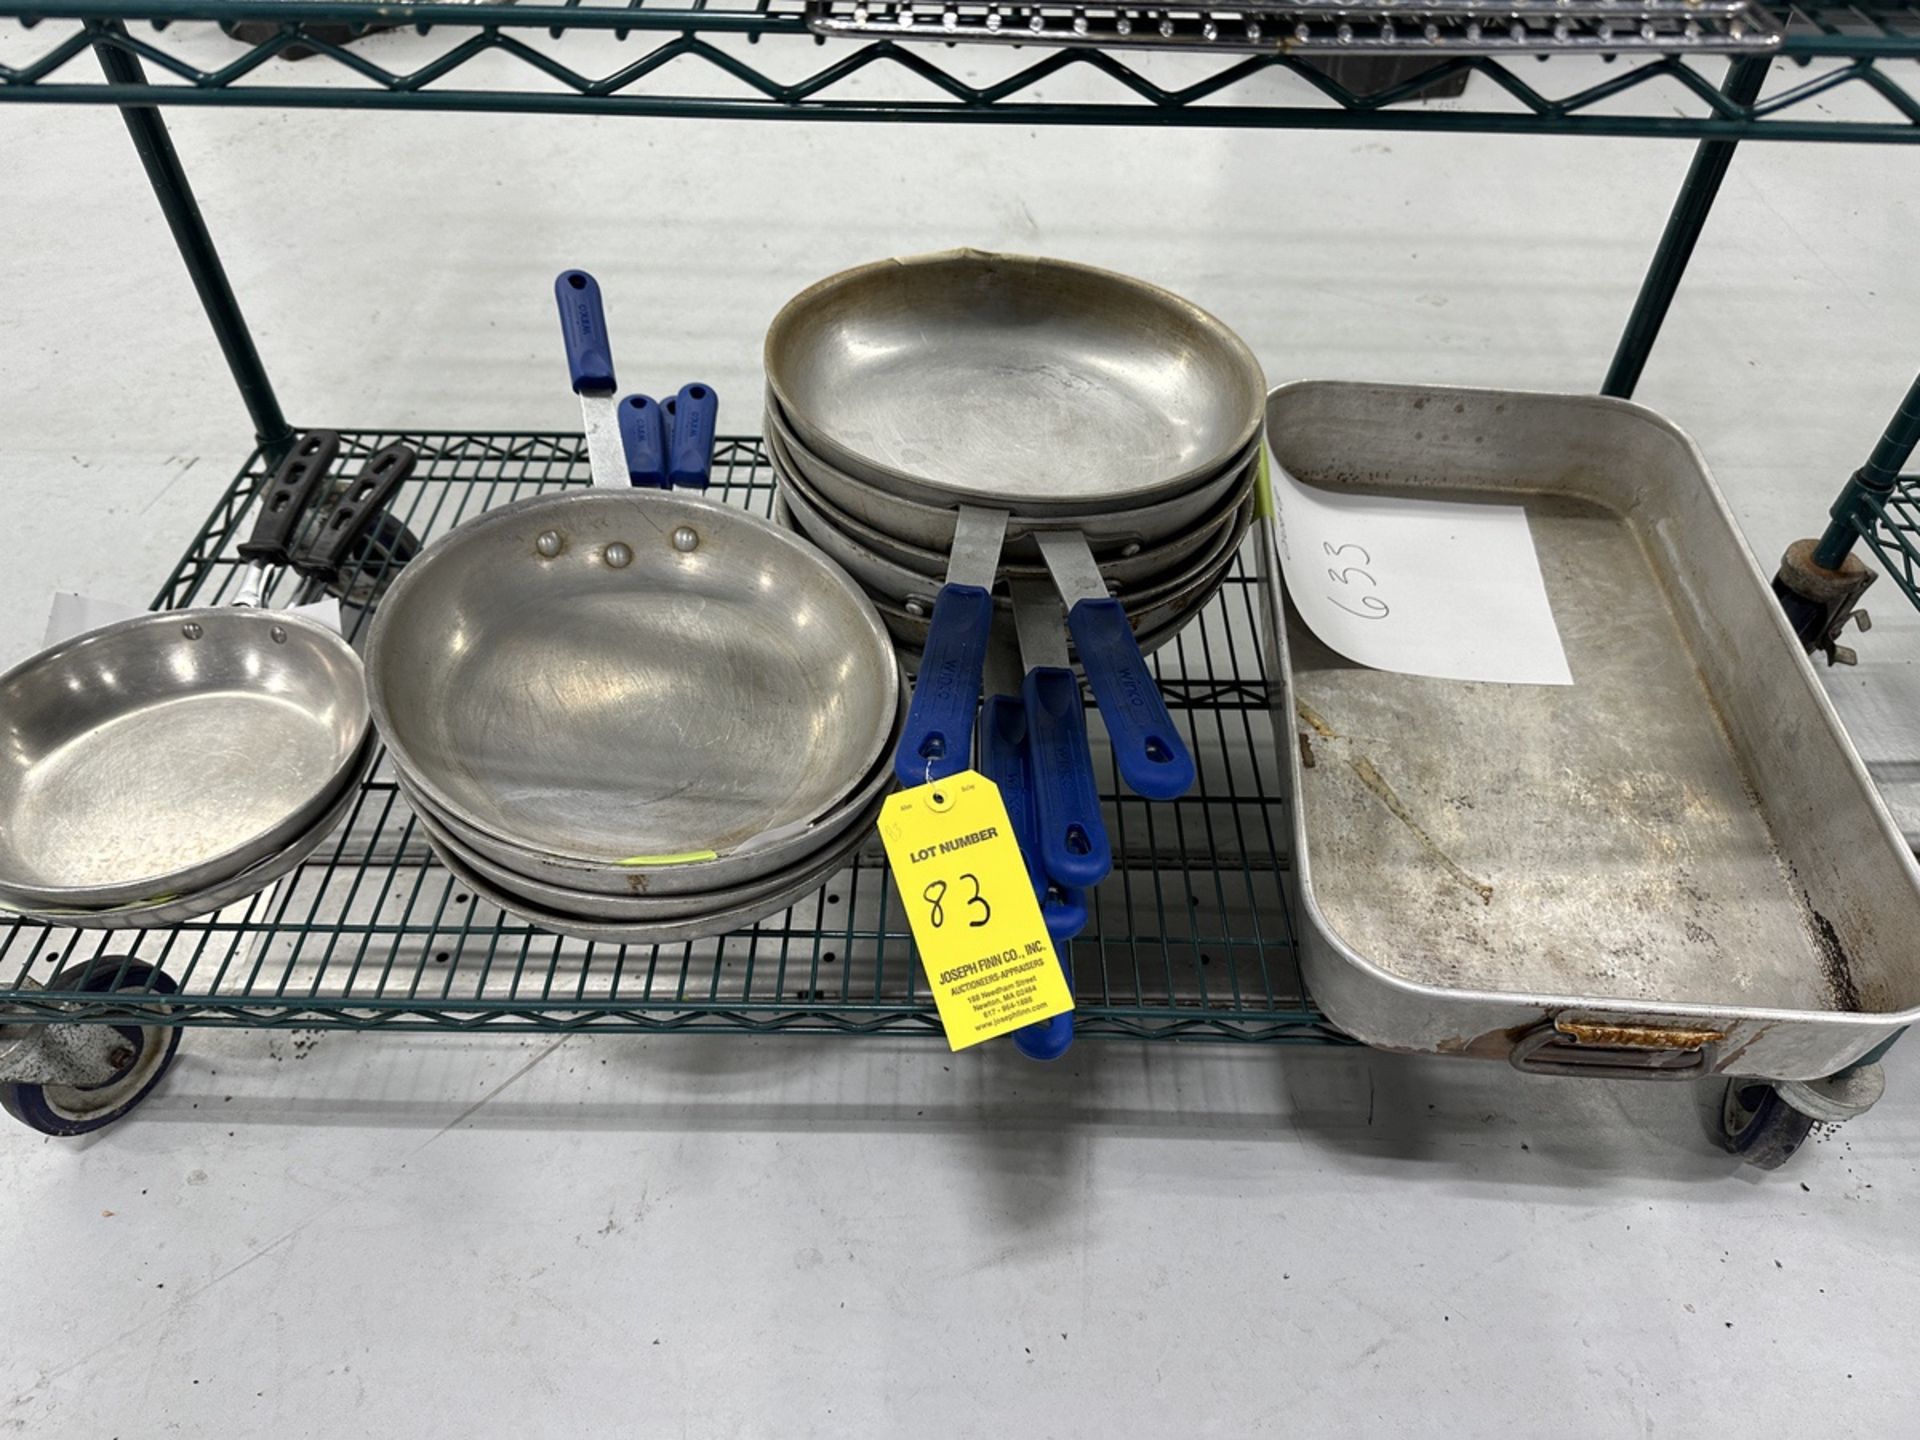 LOT Asst. Pans and Tray on Bottom Shelf | Rig Fee $25